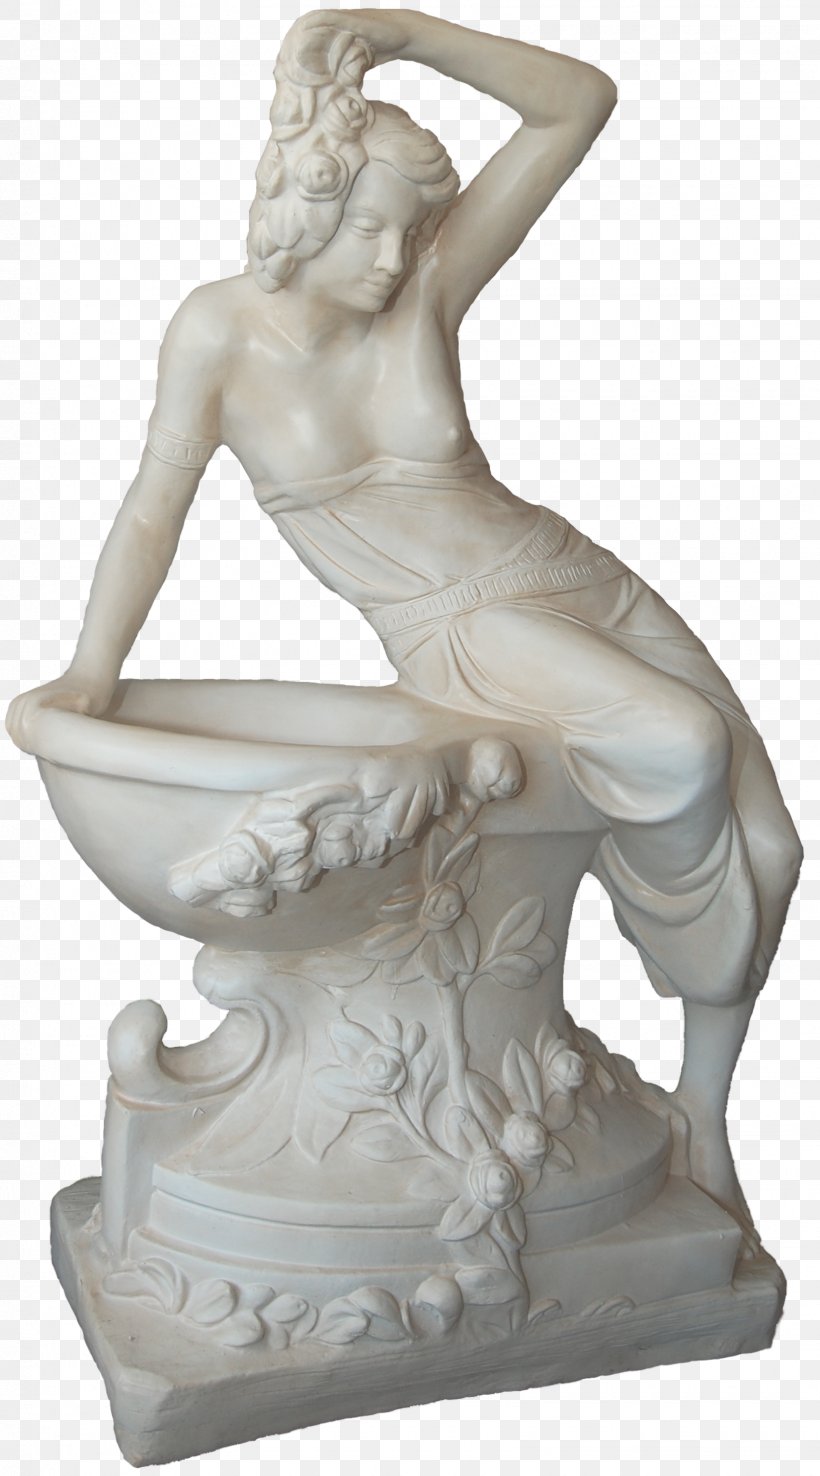 Angels Statue Classical Sculpture Clip Art, PNG, 1630x2935px, Angels, Architecture, Artifact, Carving, Classical Sculpture Download Free